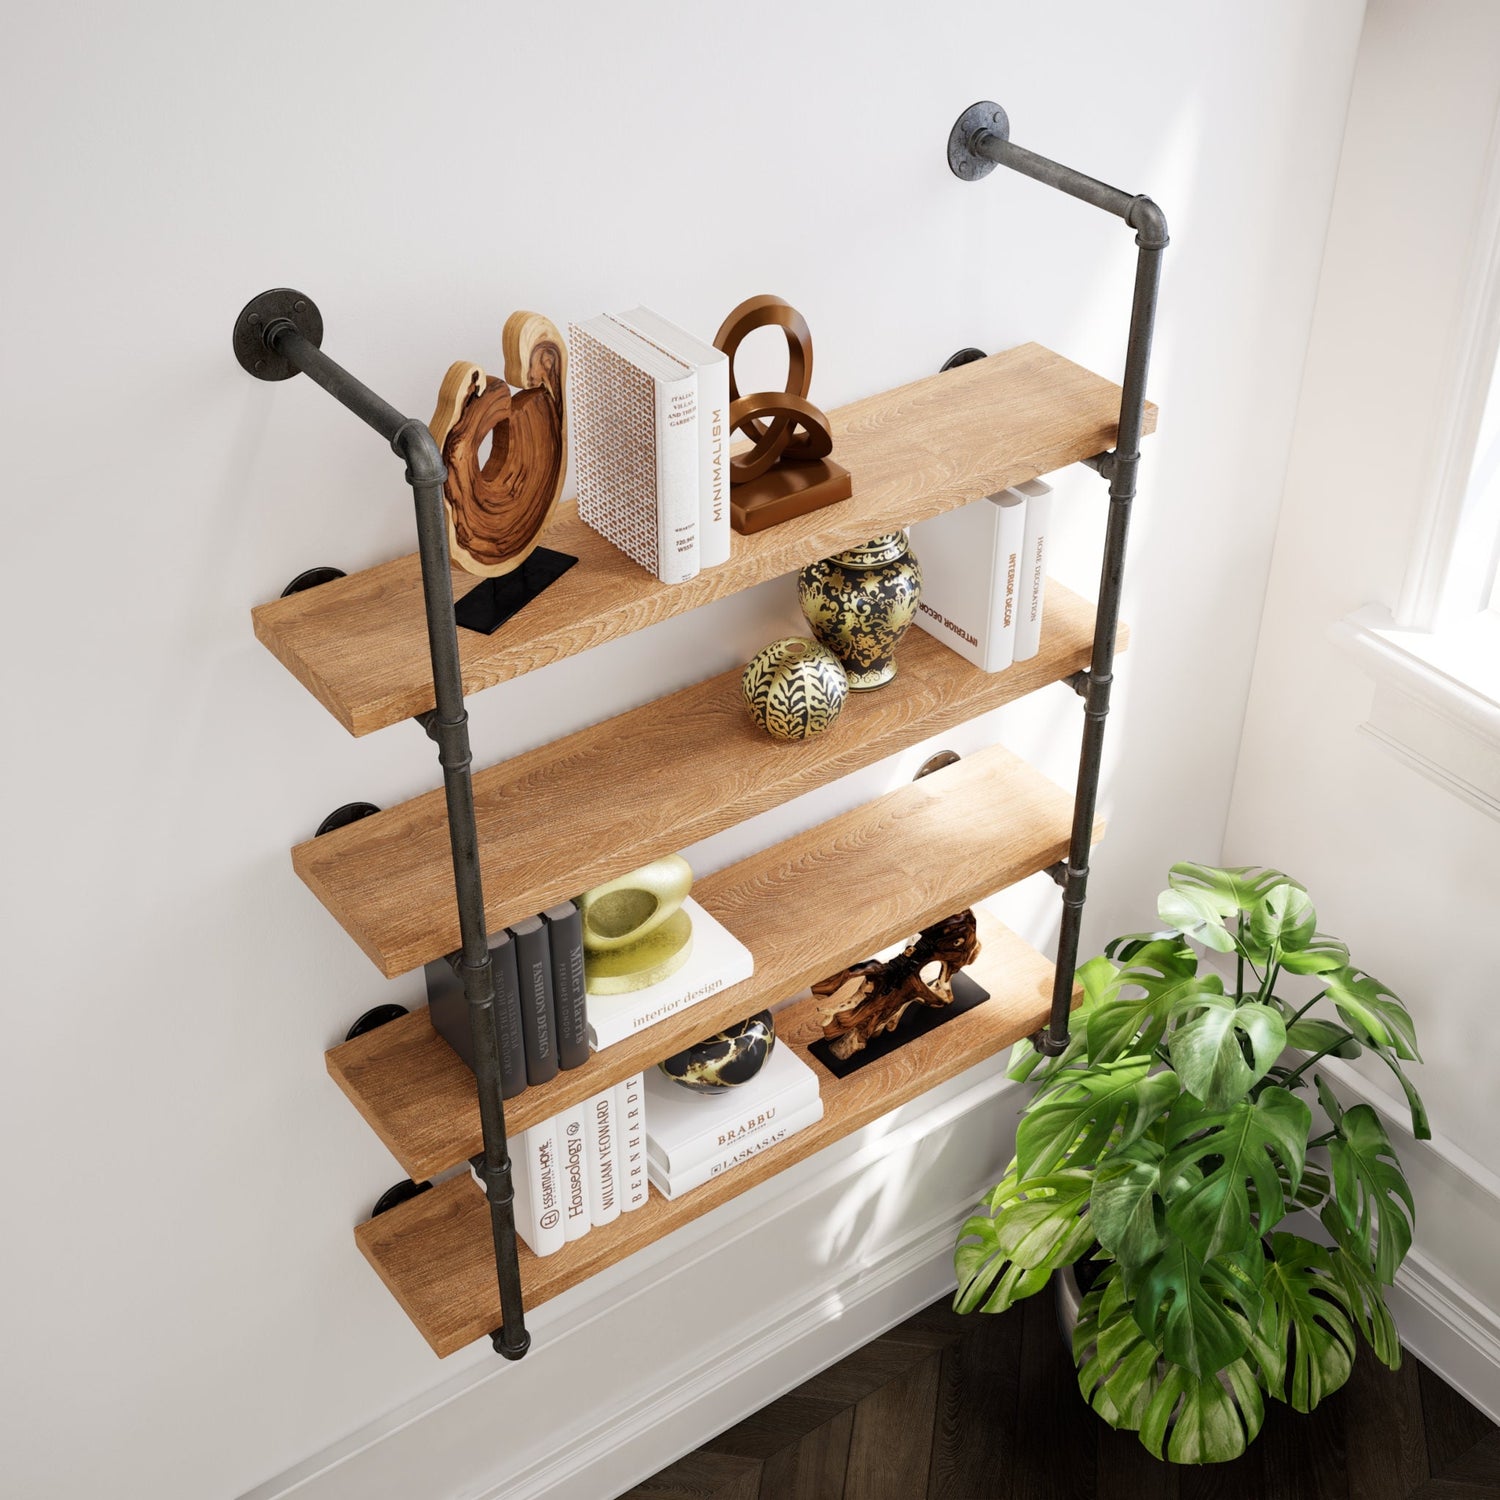 Wall Mounted Kitchen Shelves - VisualHunt